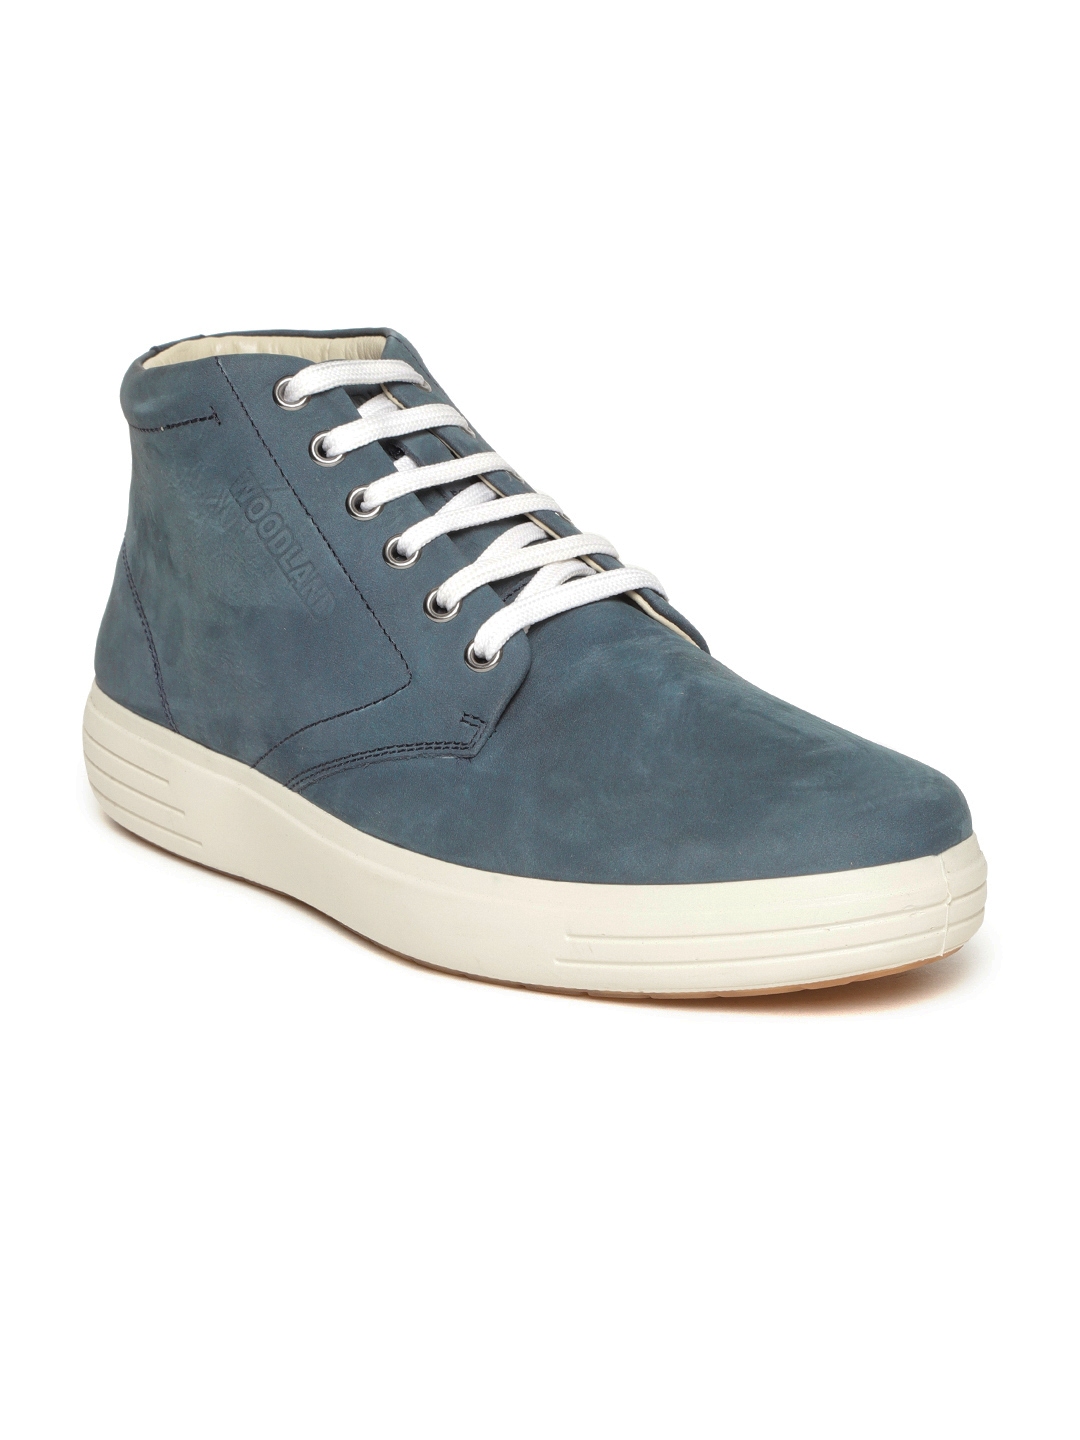 Buy Woodland Men Blue Nubuck Leather Mid Top Sneakers - Casual Shoes ...